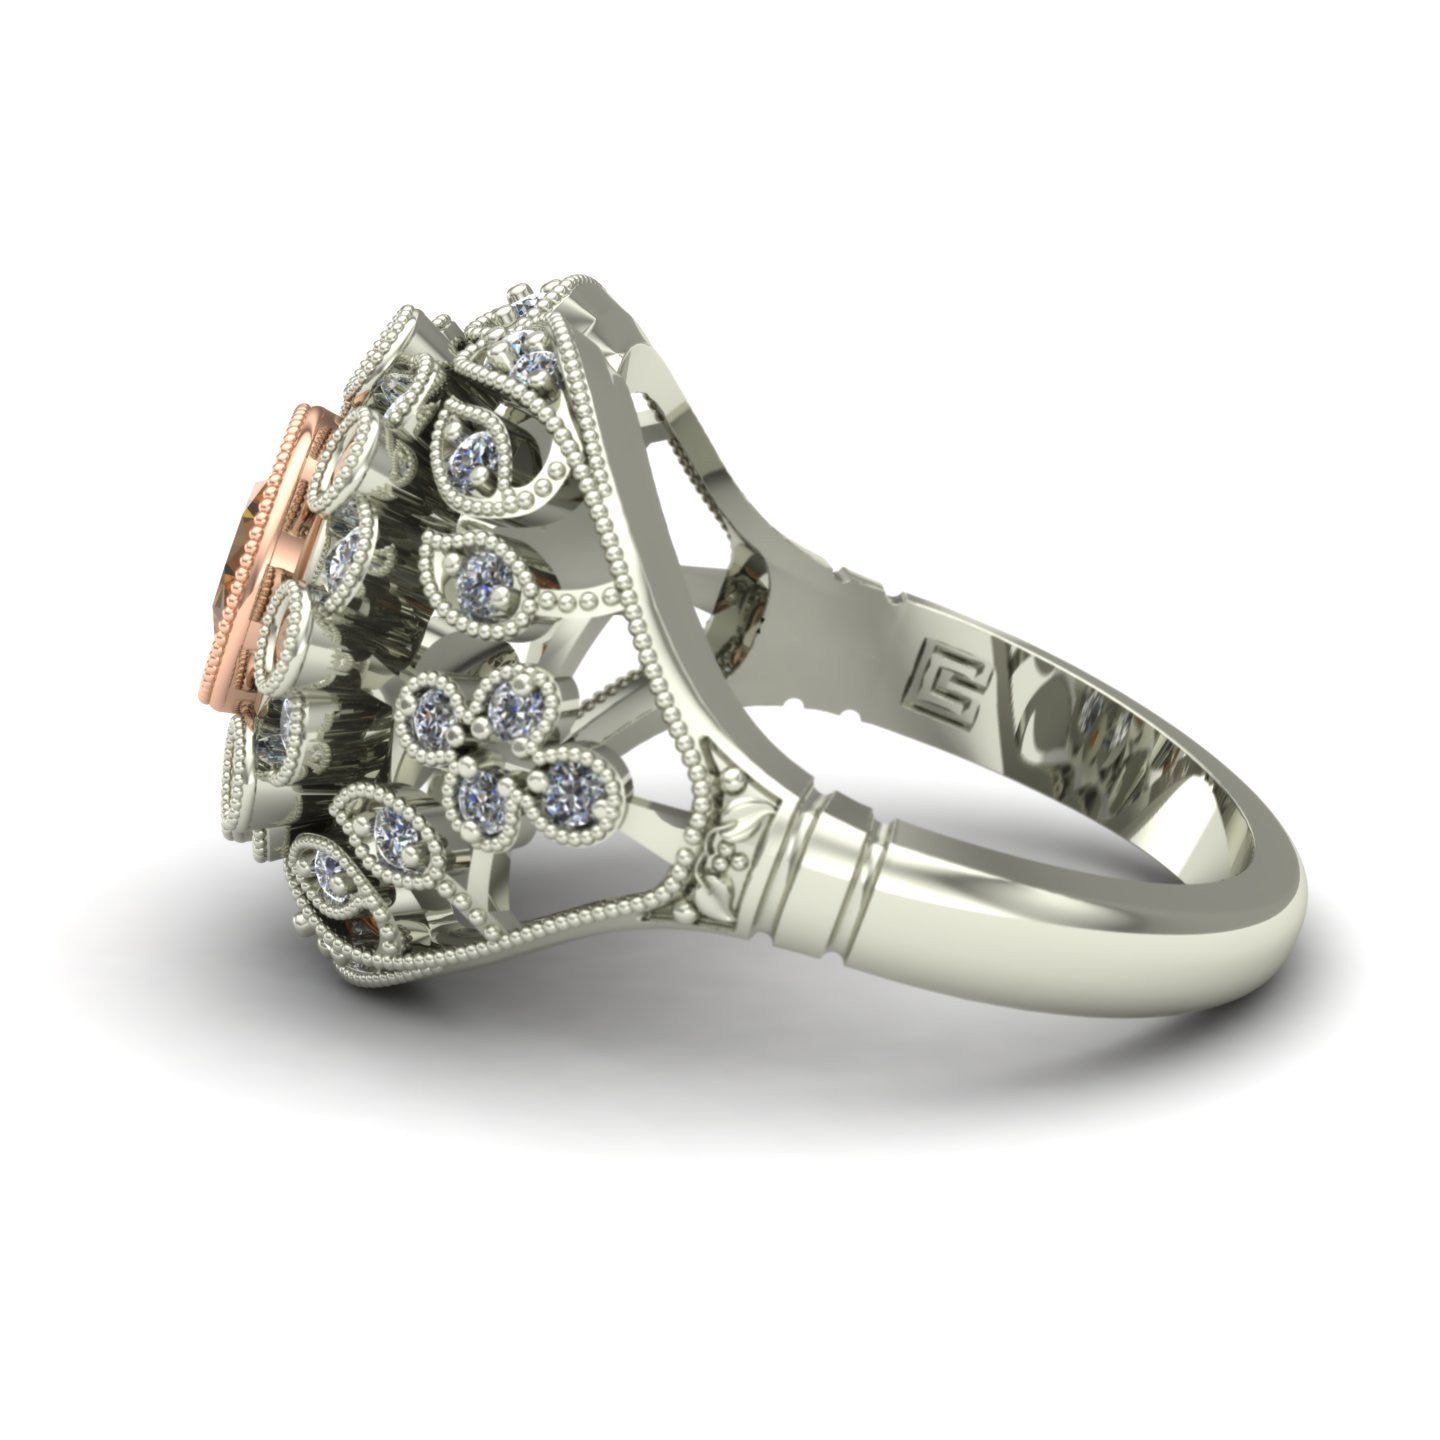 bezel set cognac and white diamond two tone ring in 14k rose and white gold - Charles Babb Designs - side view